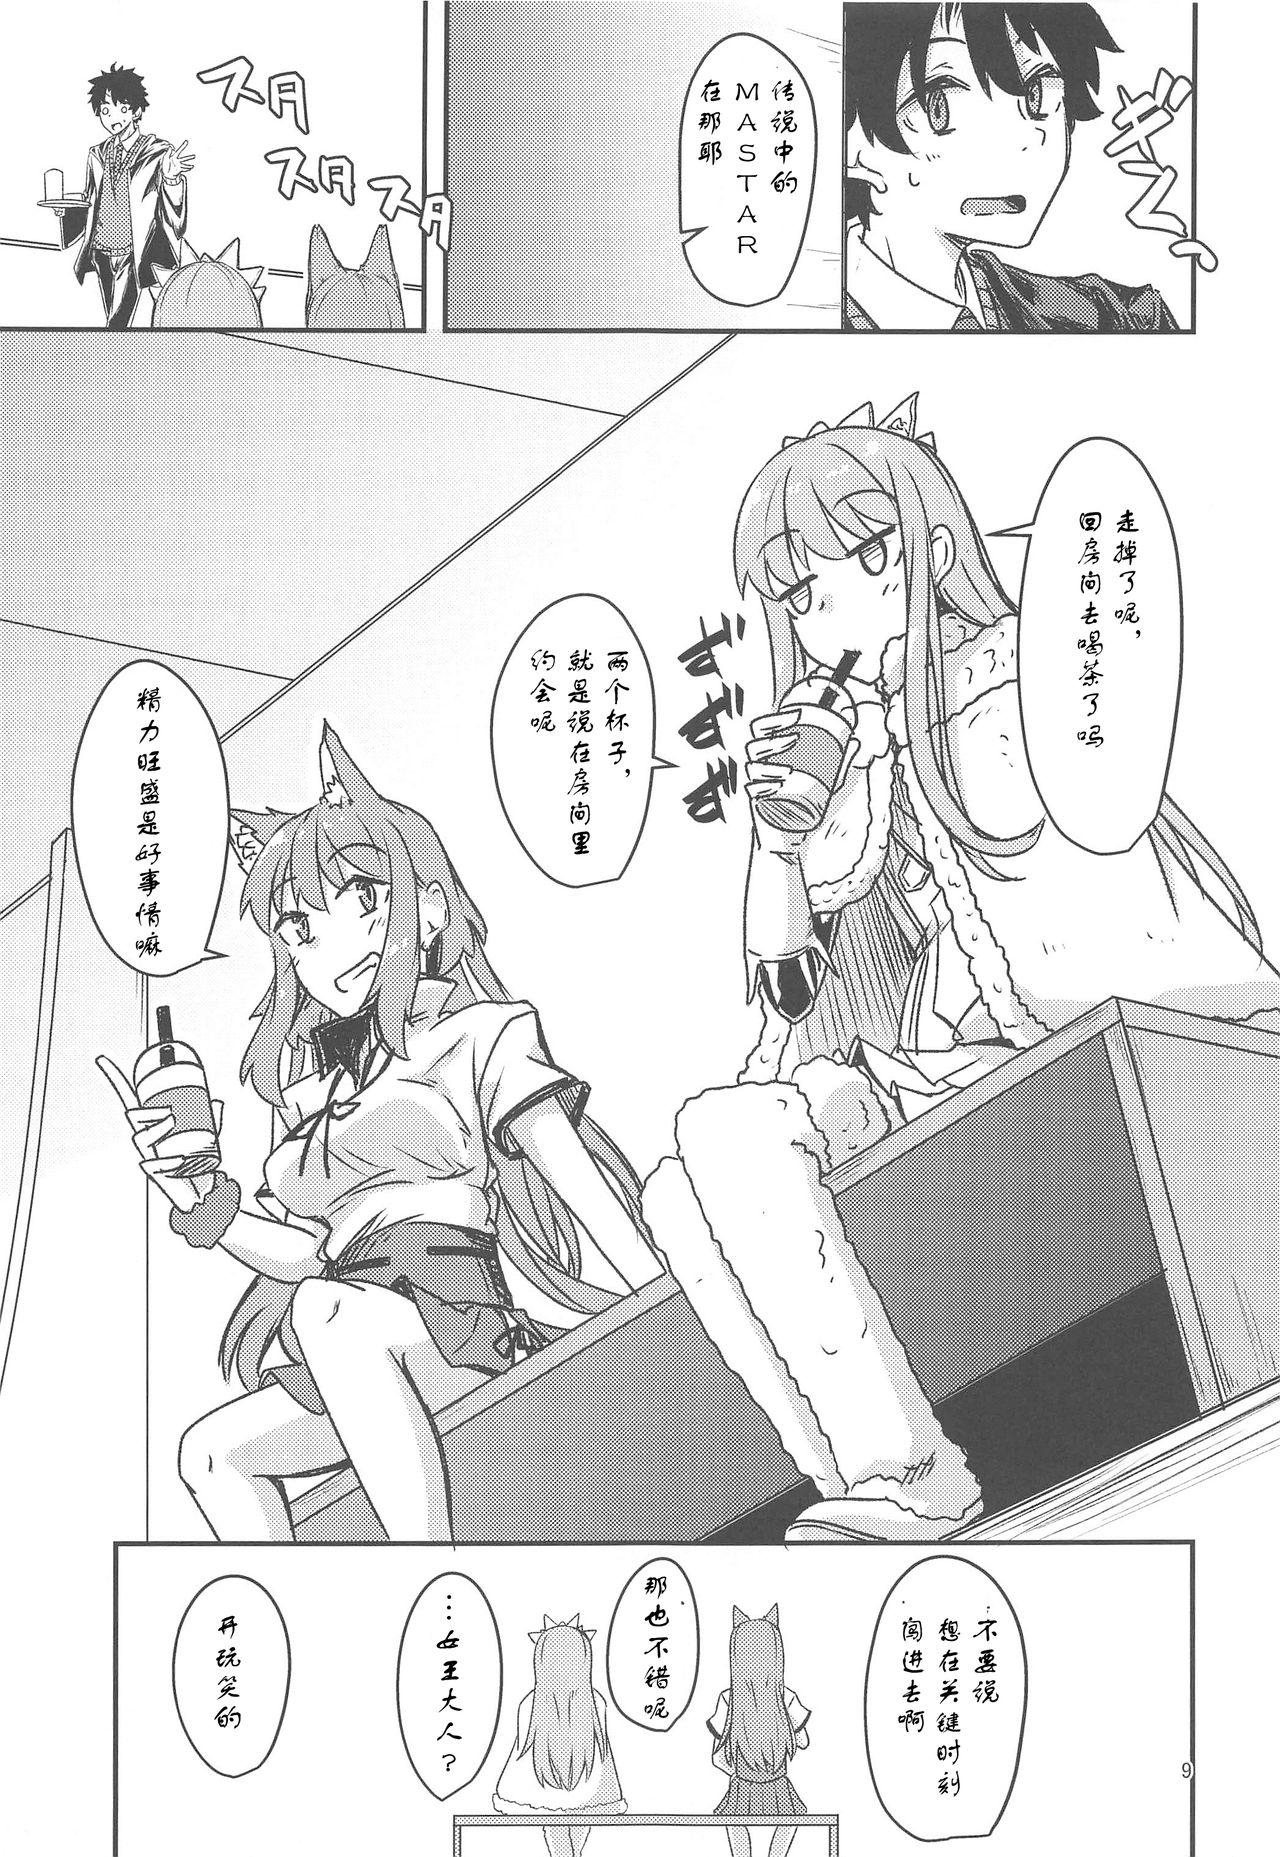 Rub Seihitsu-chan Love Hour - Fate grand order Point Of View - Page 8